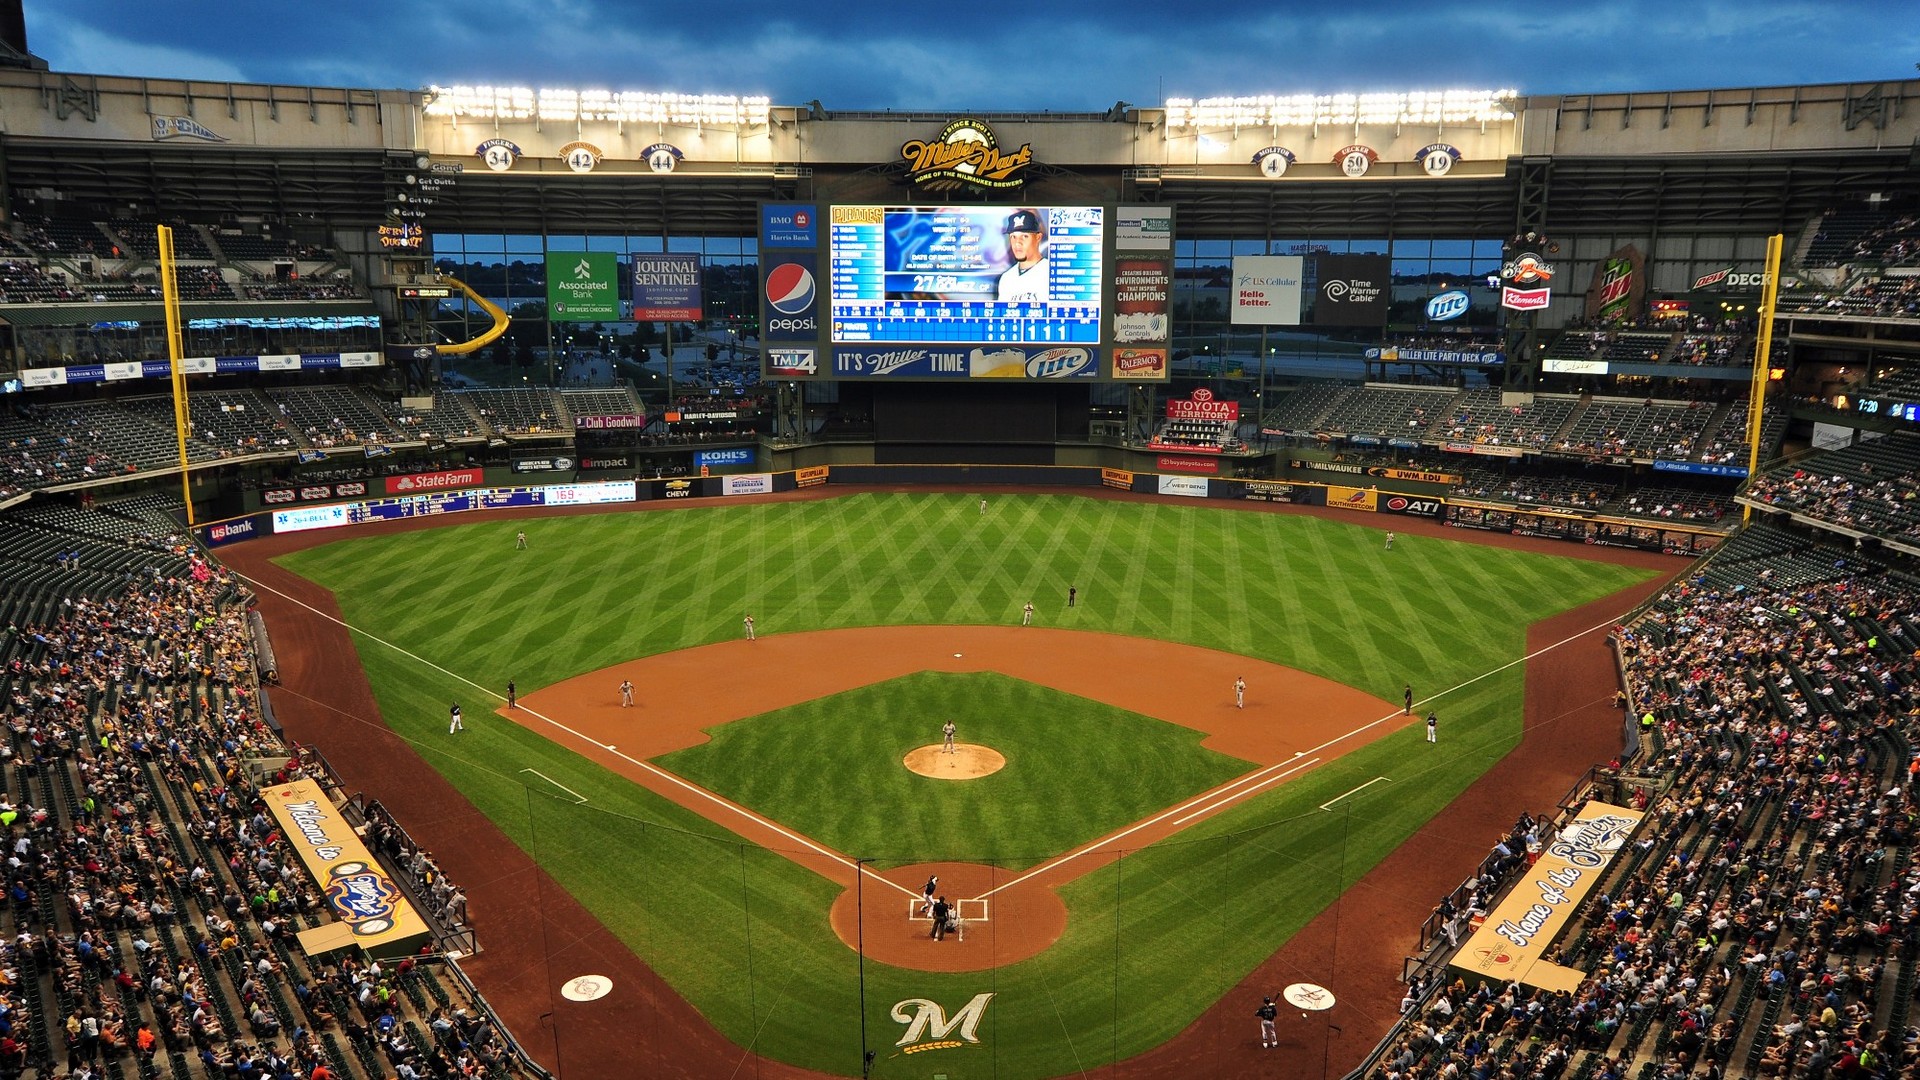 Wallpaper Desktop Milwaukee Brewers Stadium HD with high-resolution 1920x1080 pixel. You can use this wallpaper for Mac Desktop Wallpaper, Laptop Screensavers, Android Wallpapers, Tablet or iPhone Home Screen and another mobile phone device